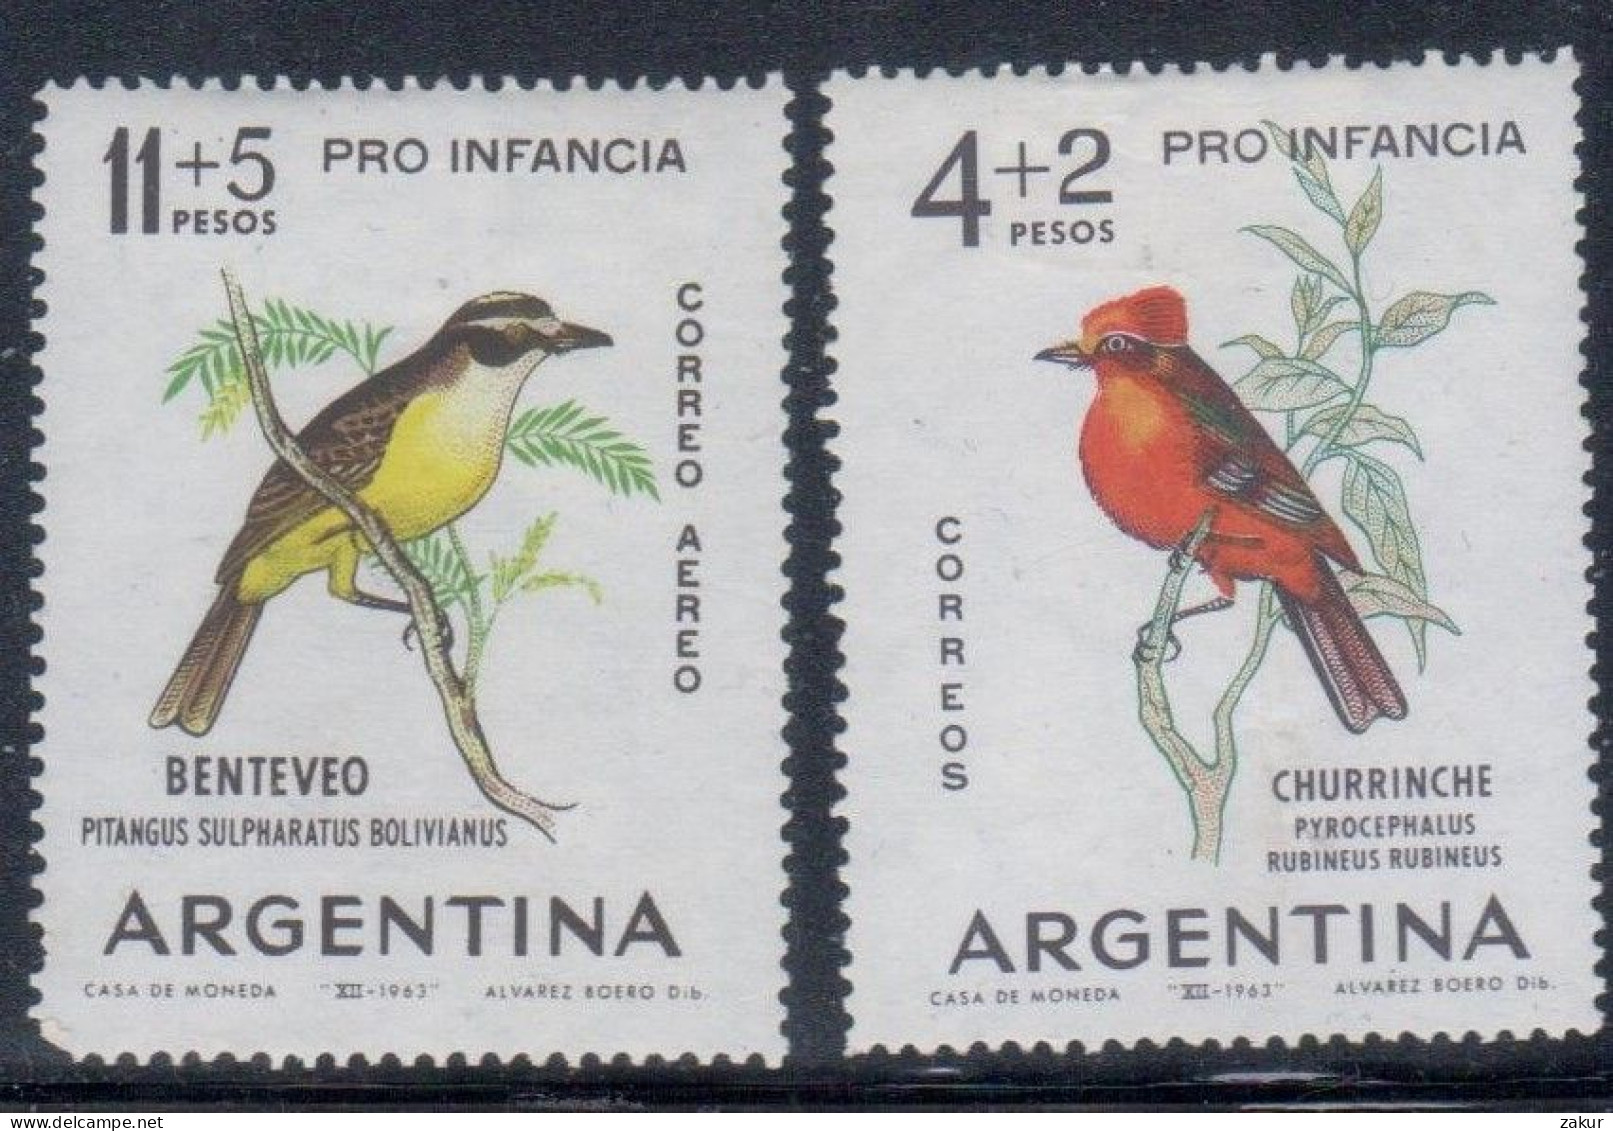 Argentina 1963 - Pro Infancia - Aves - Unused Stamps